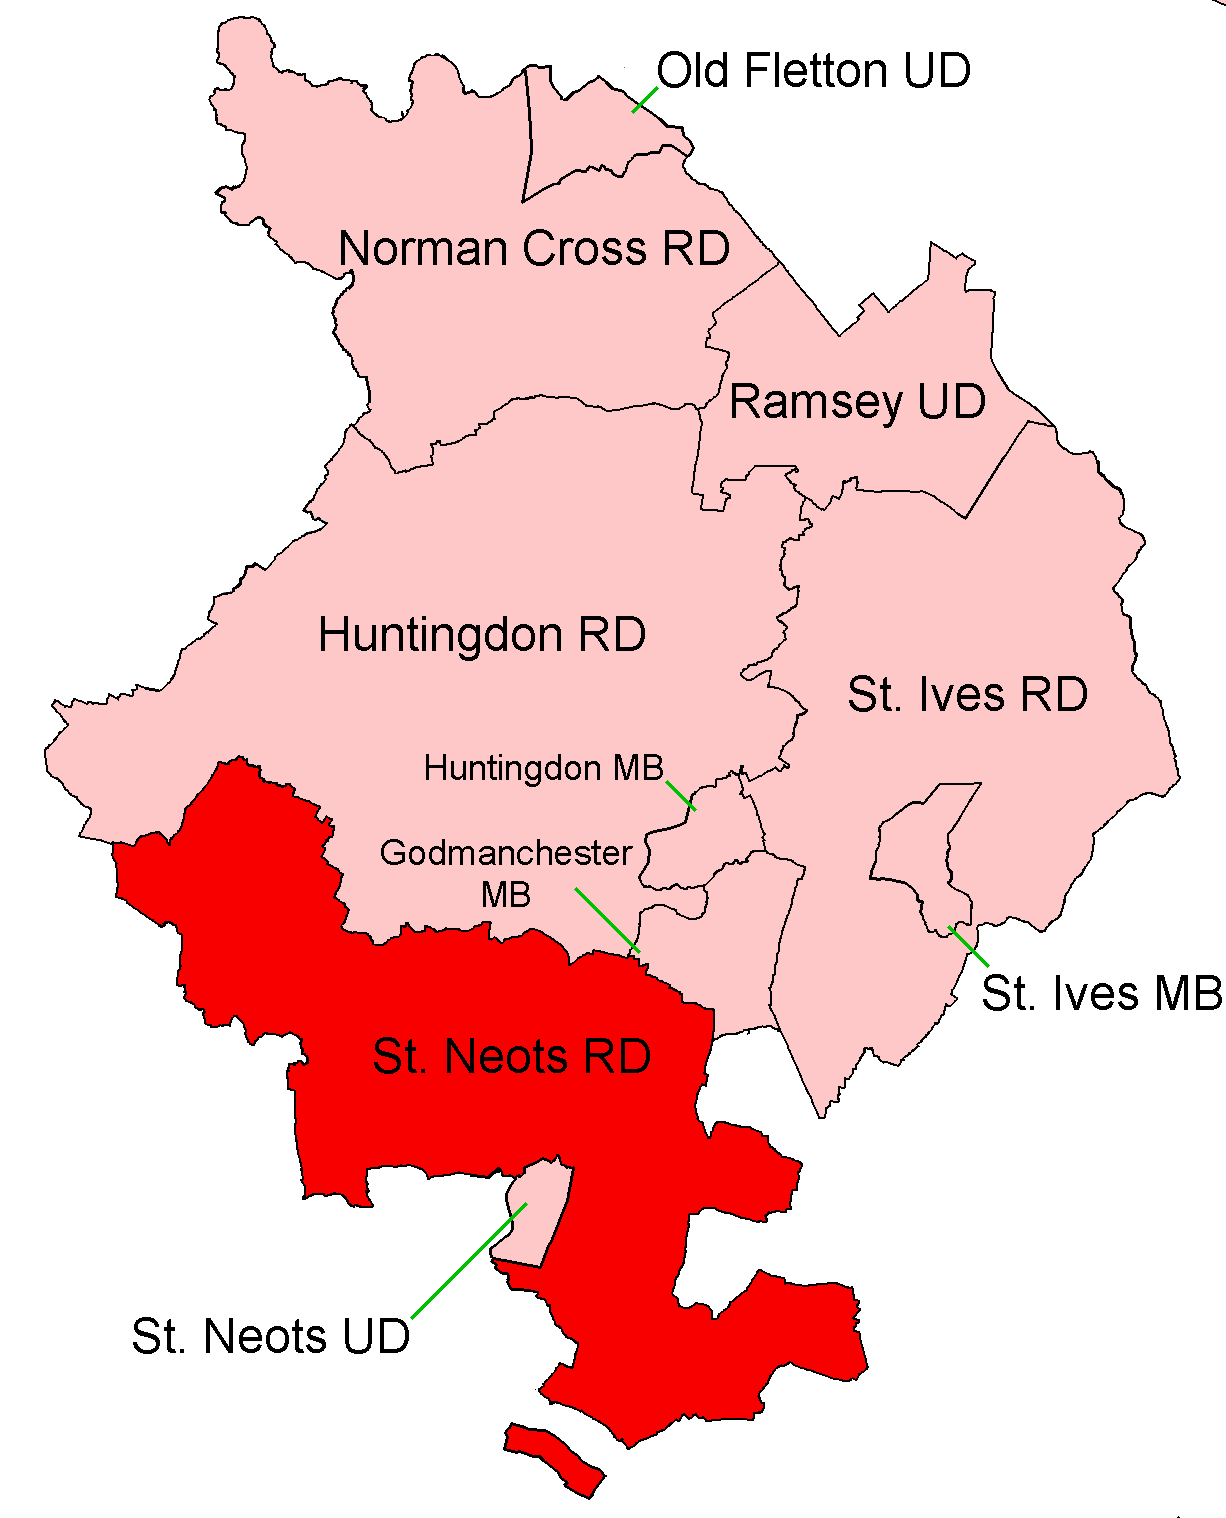 St Neots Rural District